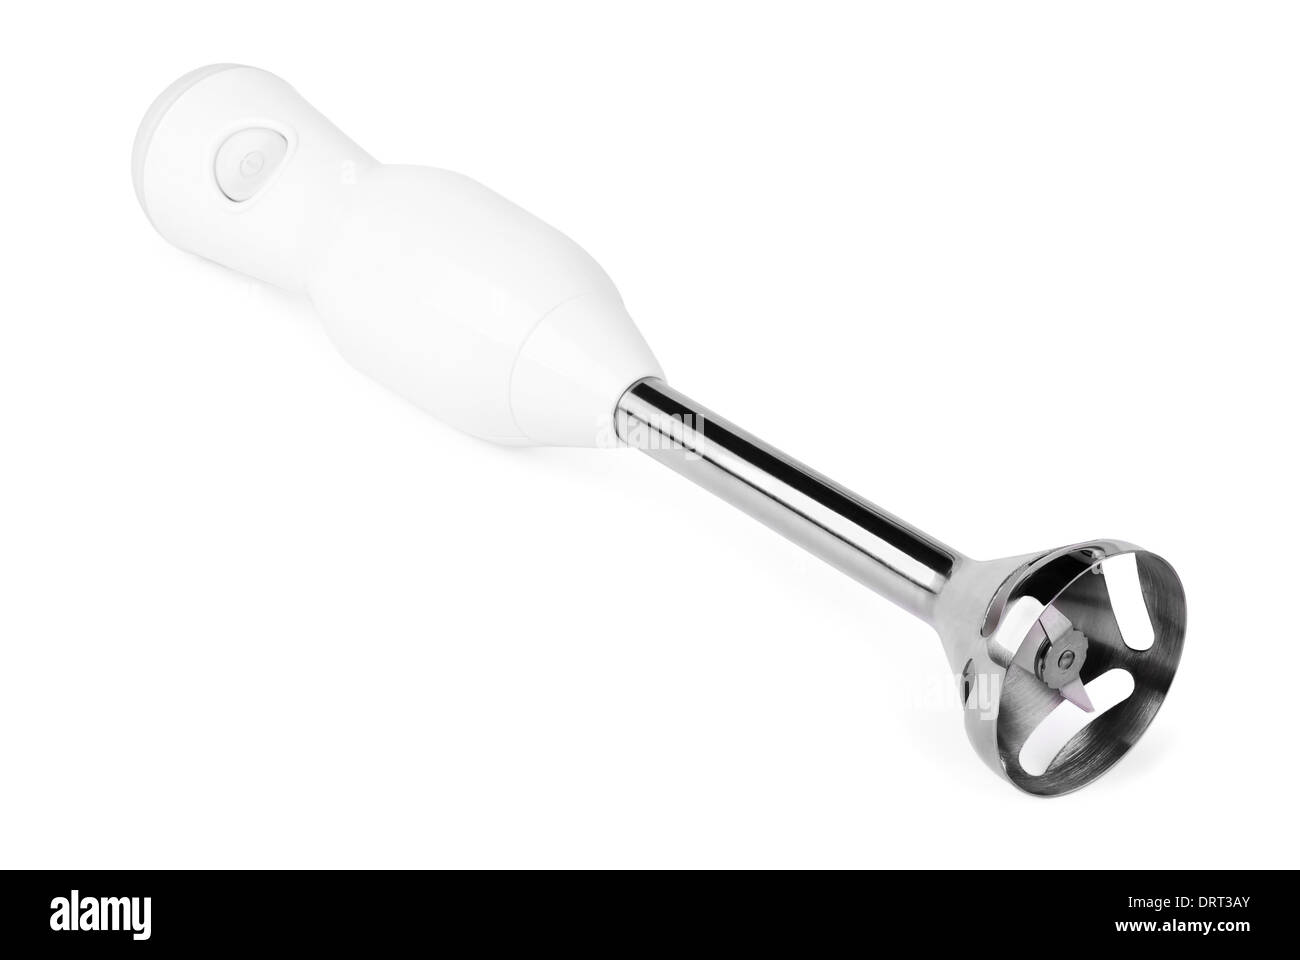 Electric hand blender on a white background Stock Photo